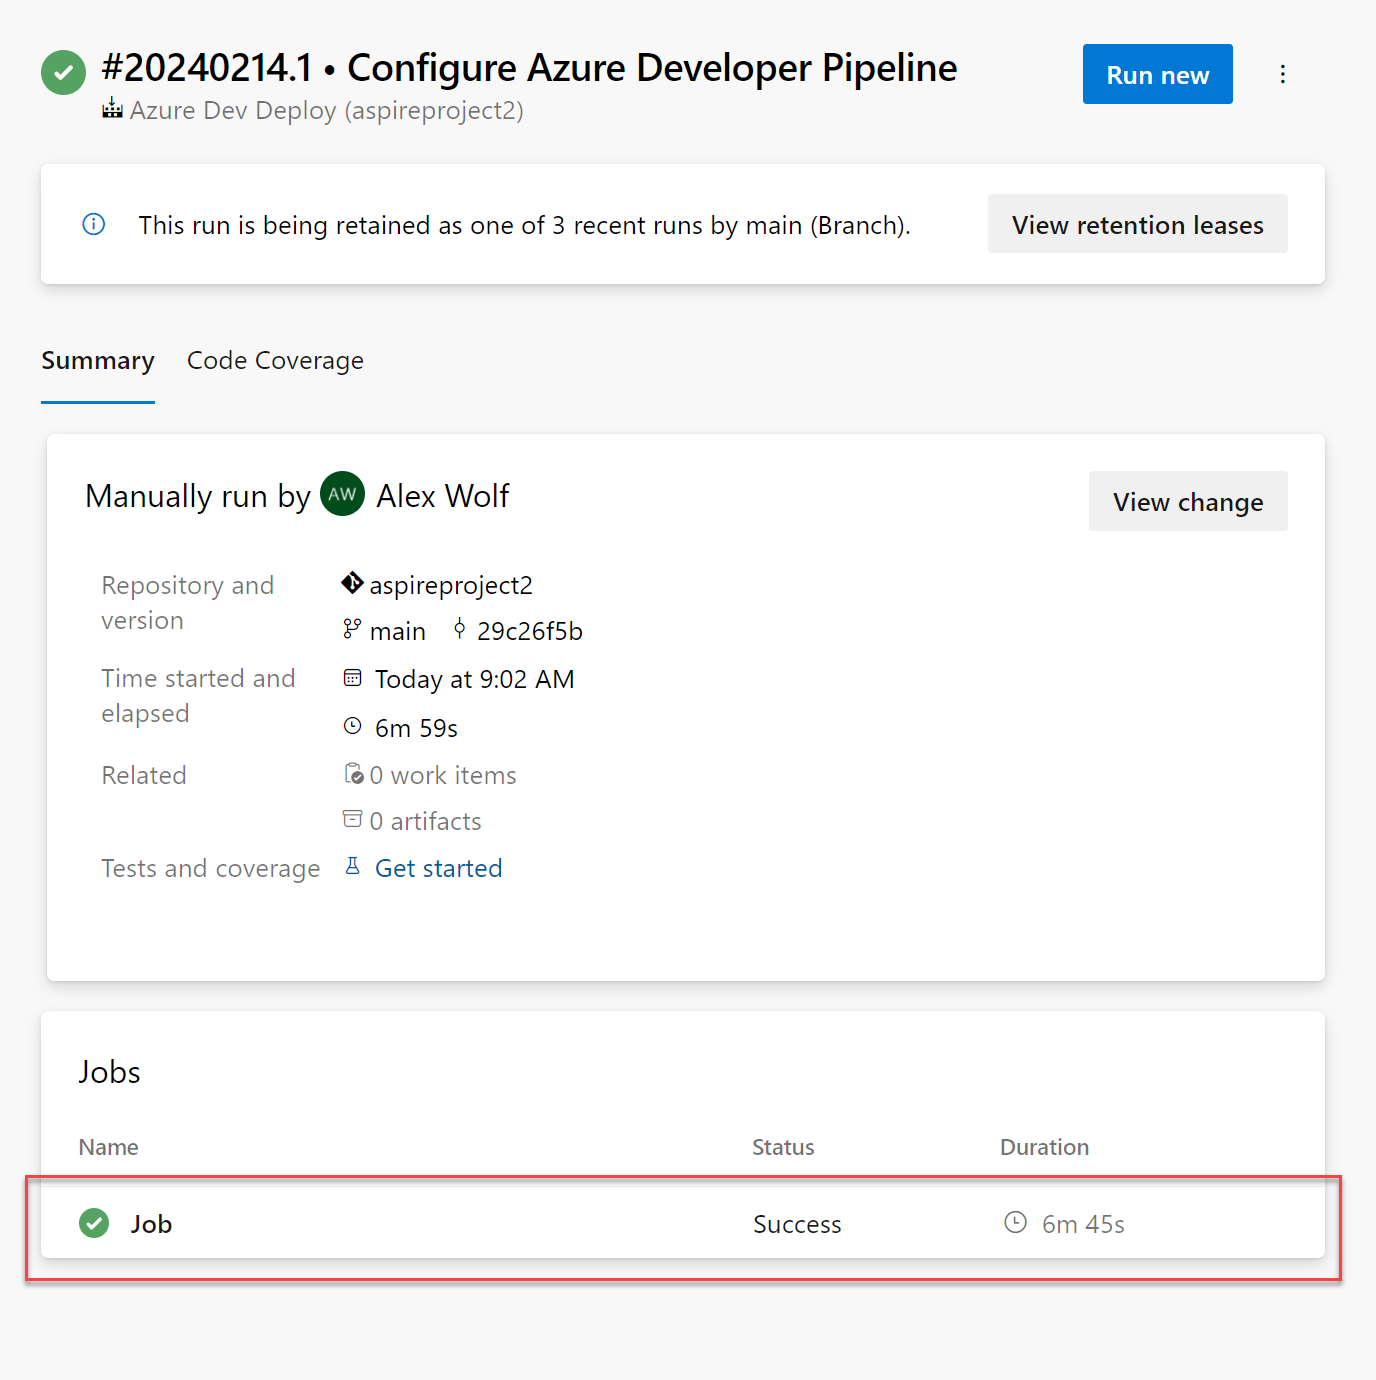 A screenshot showing the summary view of the Azure Pipelines run.